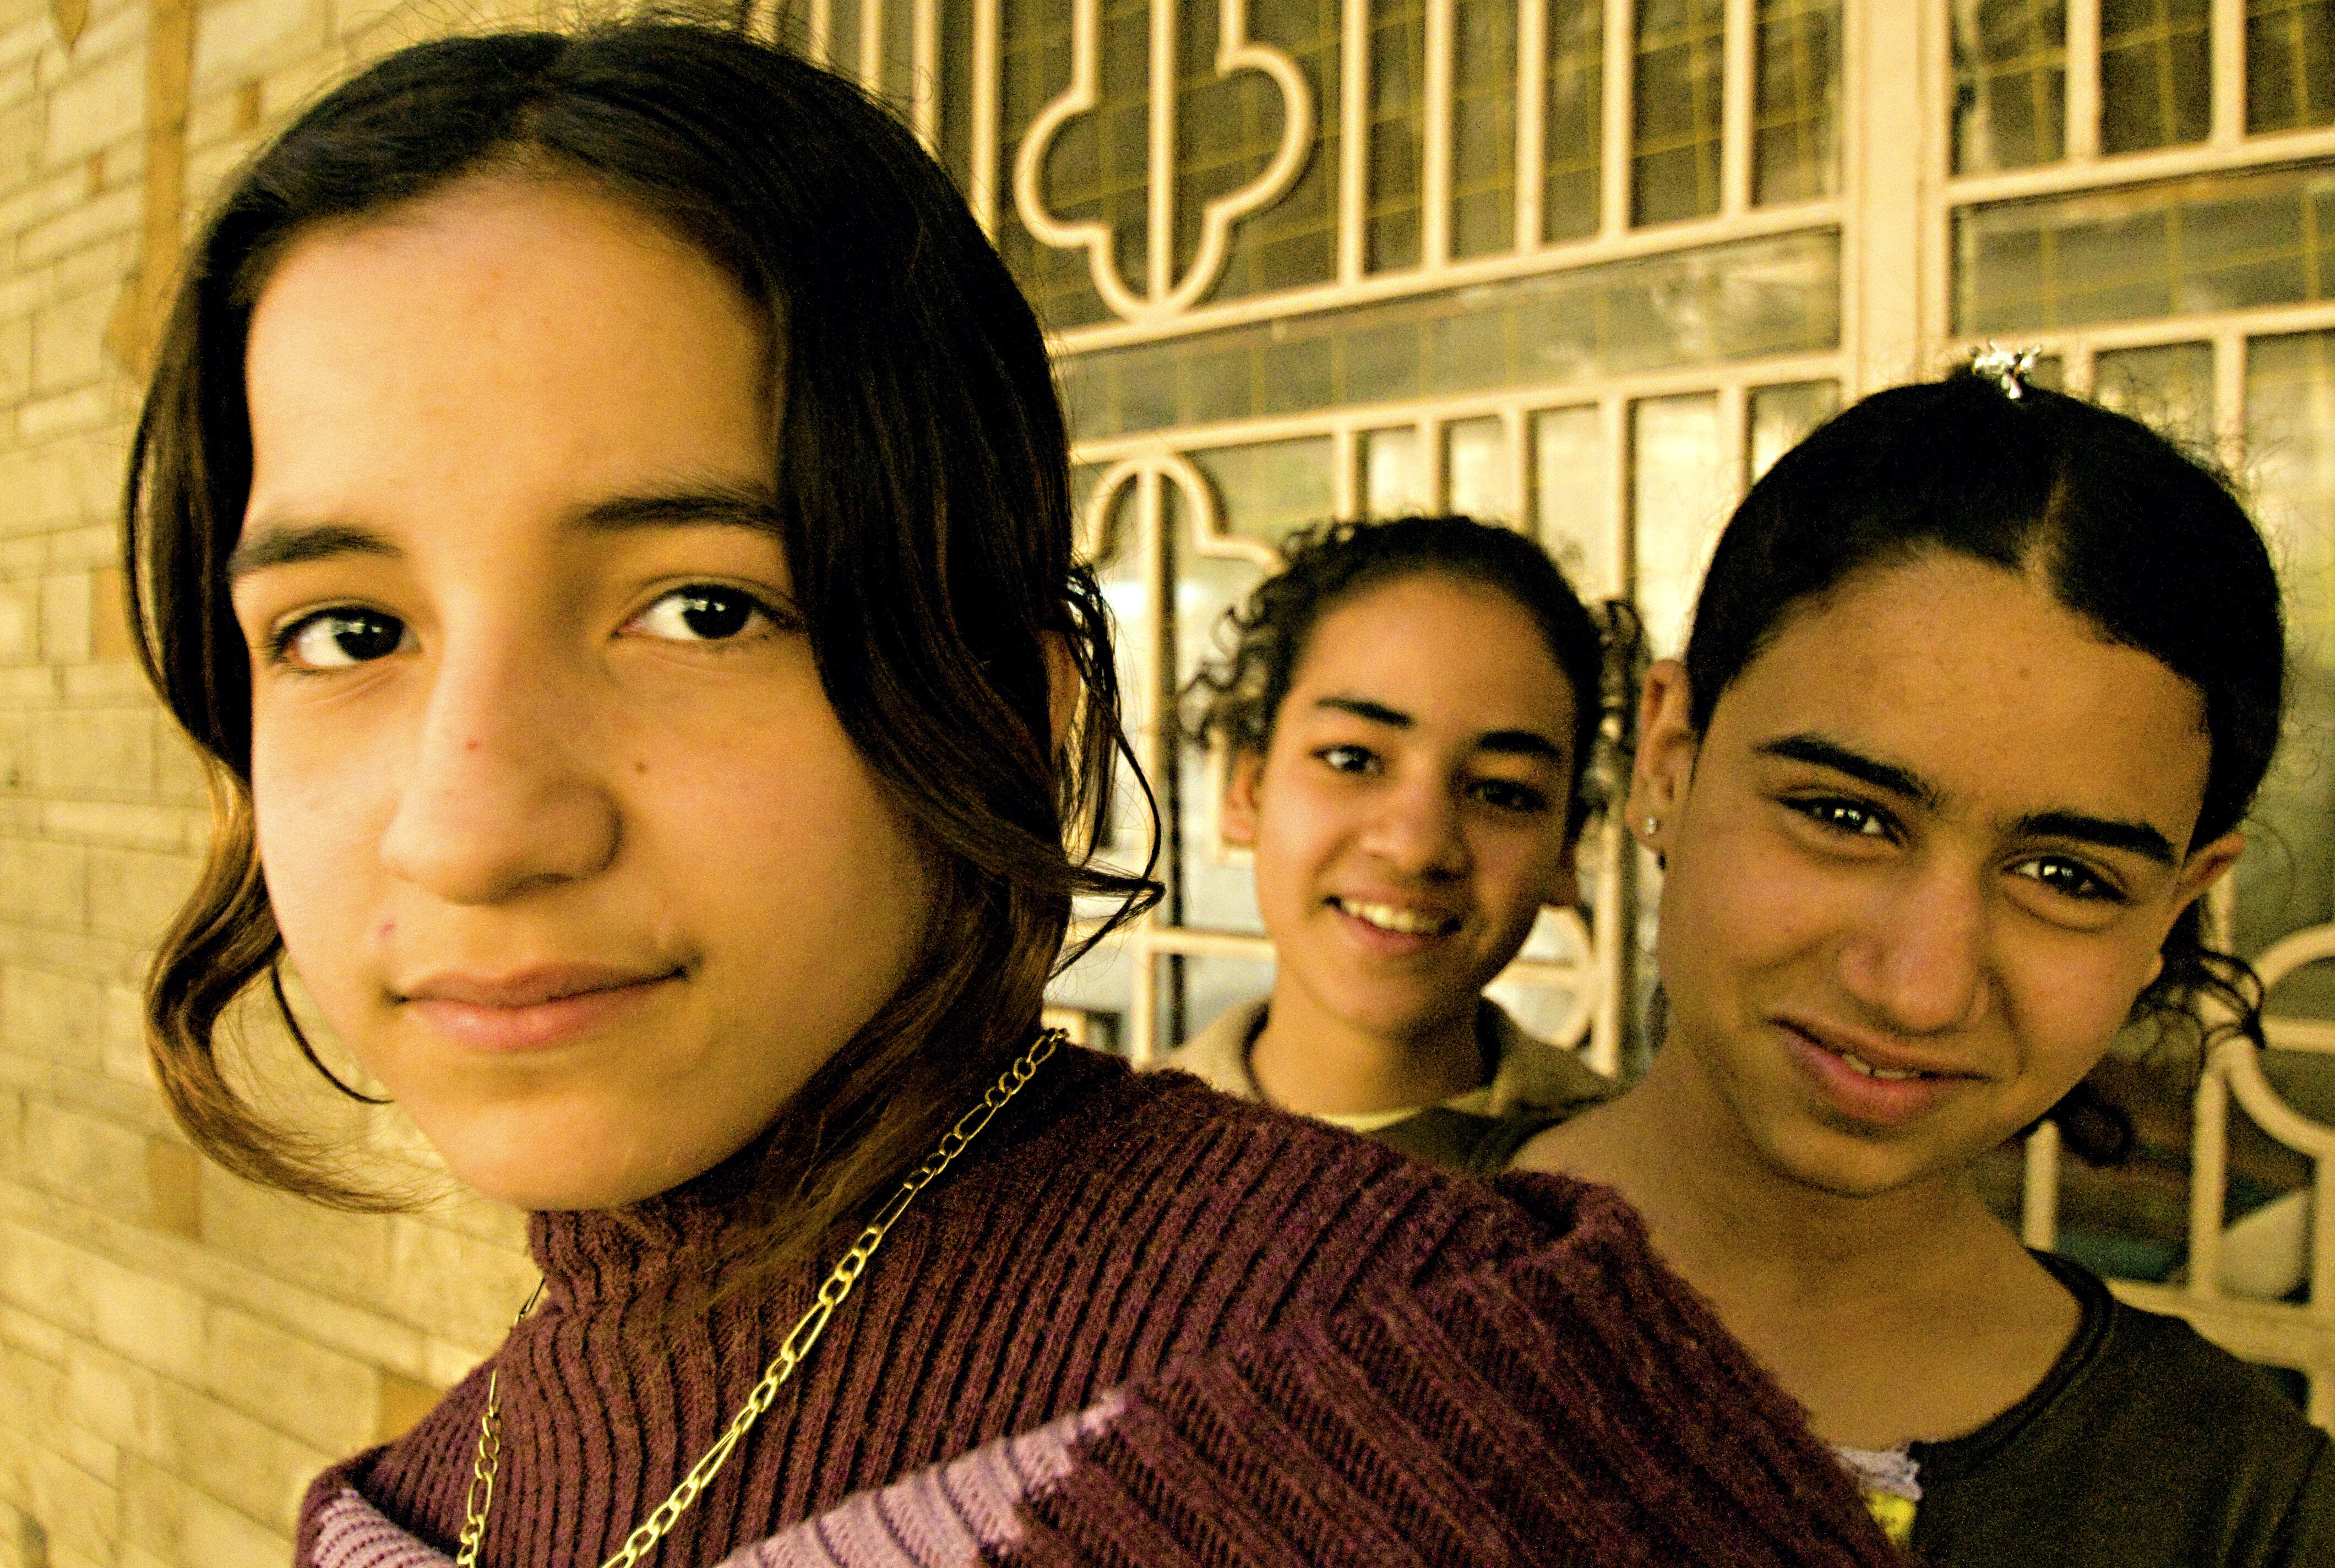 How Can We Help Egypt Tackle the Problem of FGM?